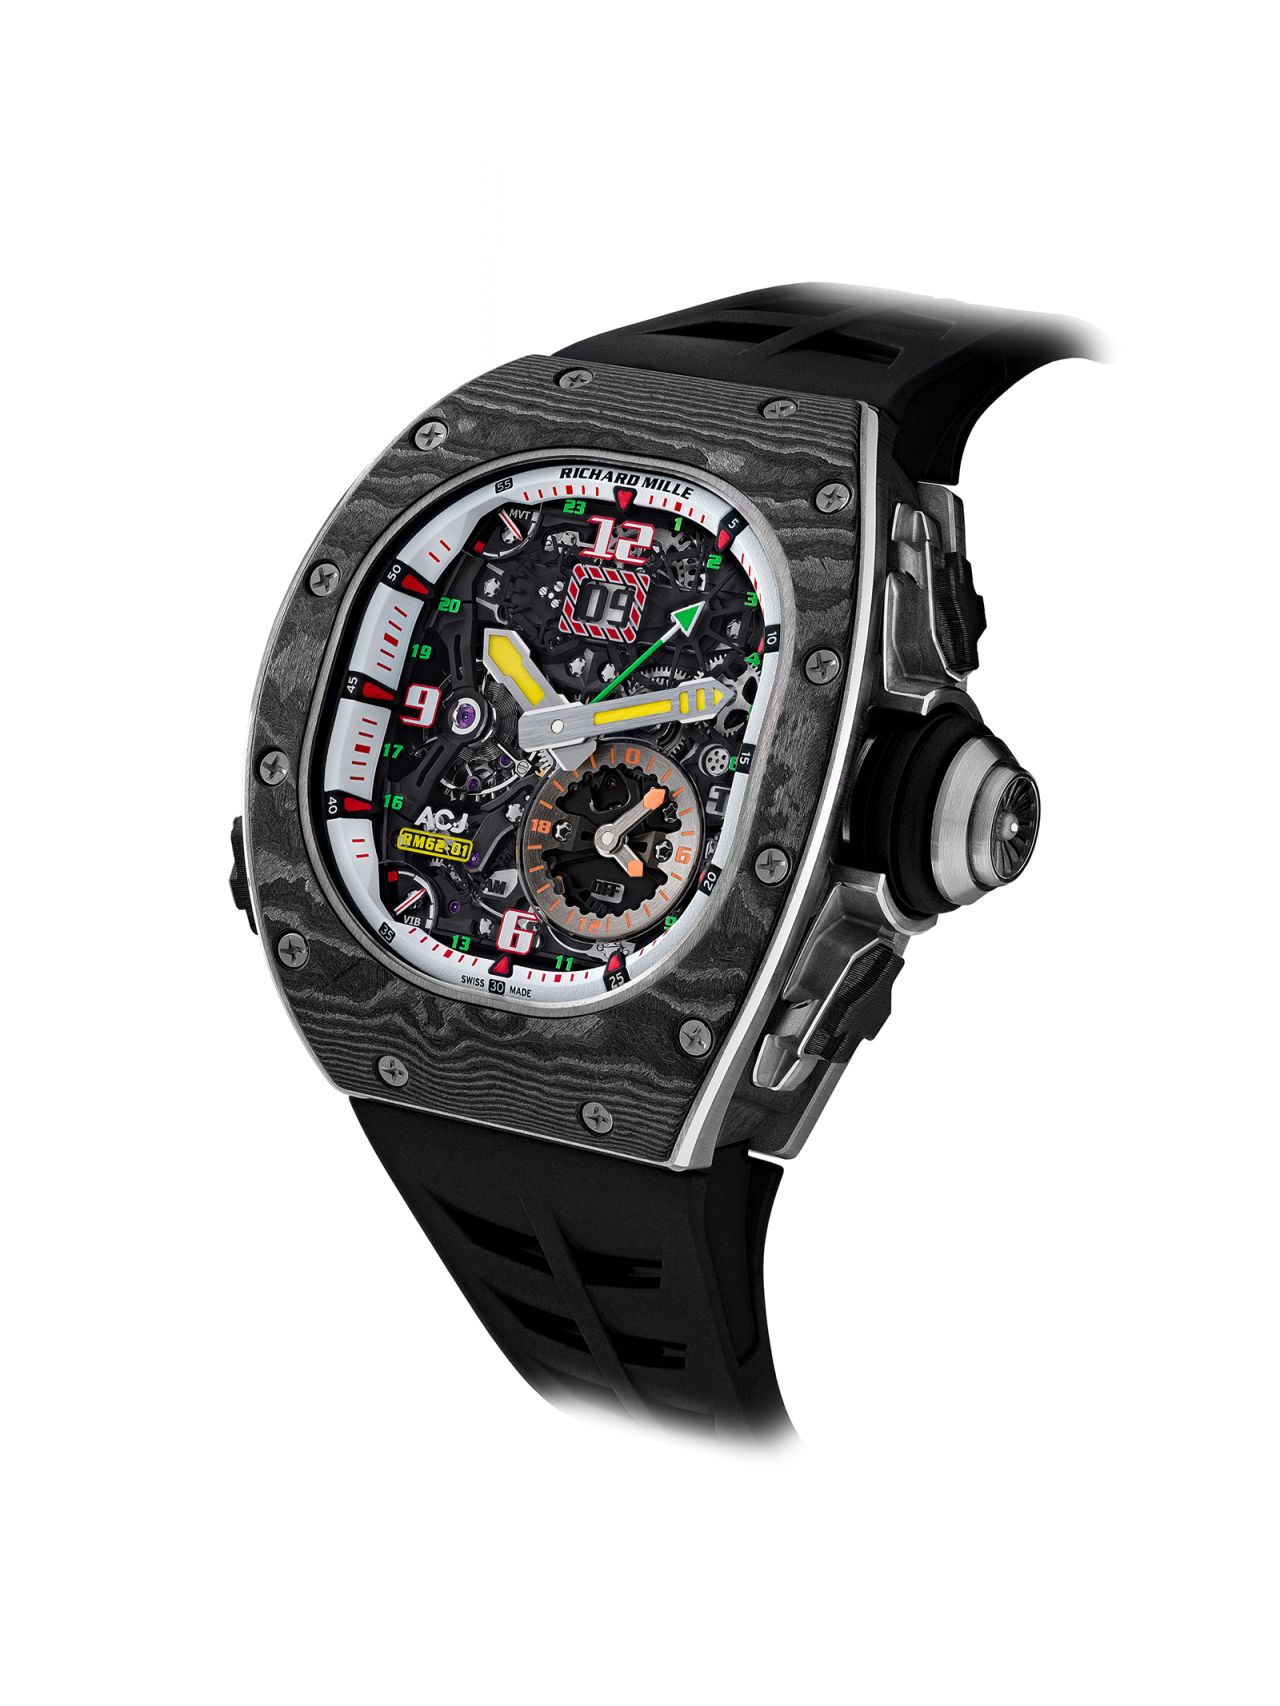 The Richard Mille RM62-01 Airbus Corporate Jets